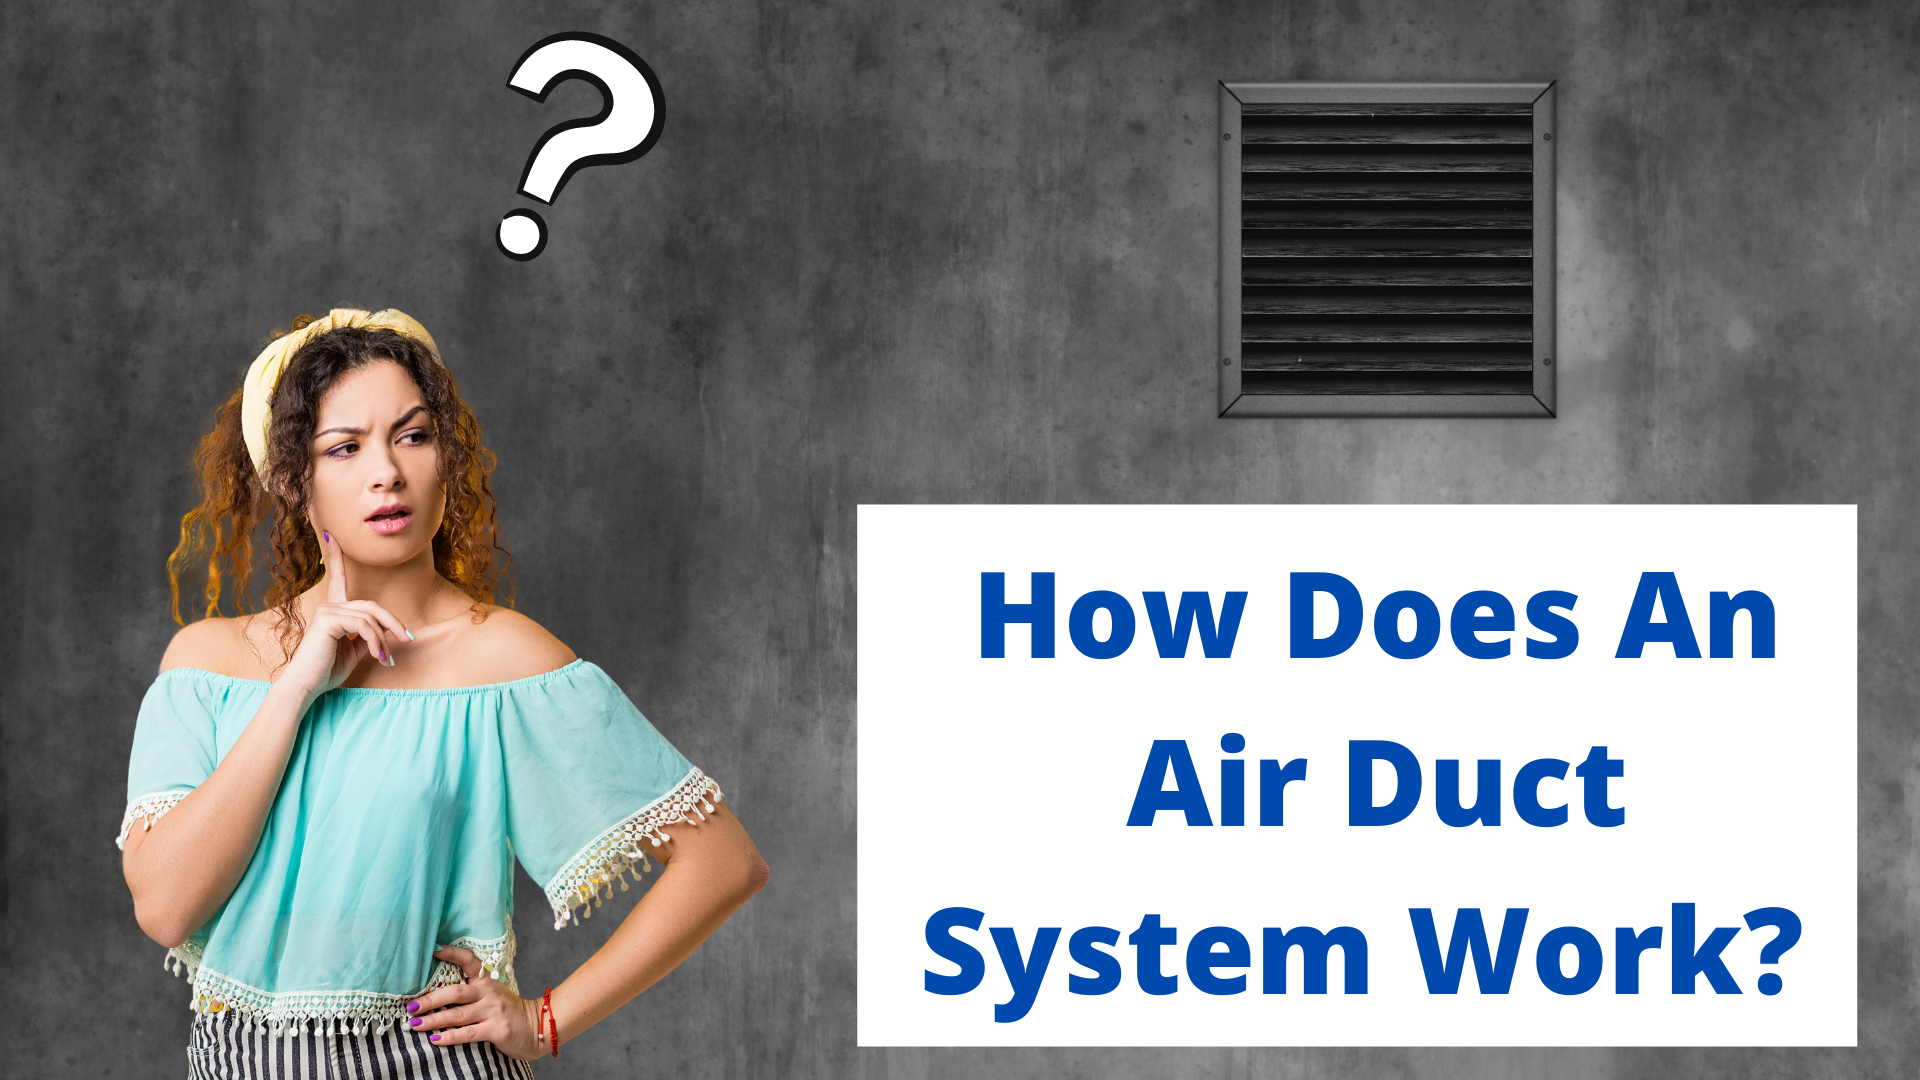 How Does An Air Duct System Work